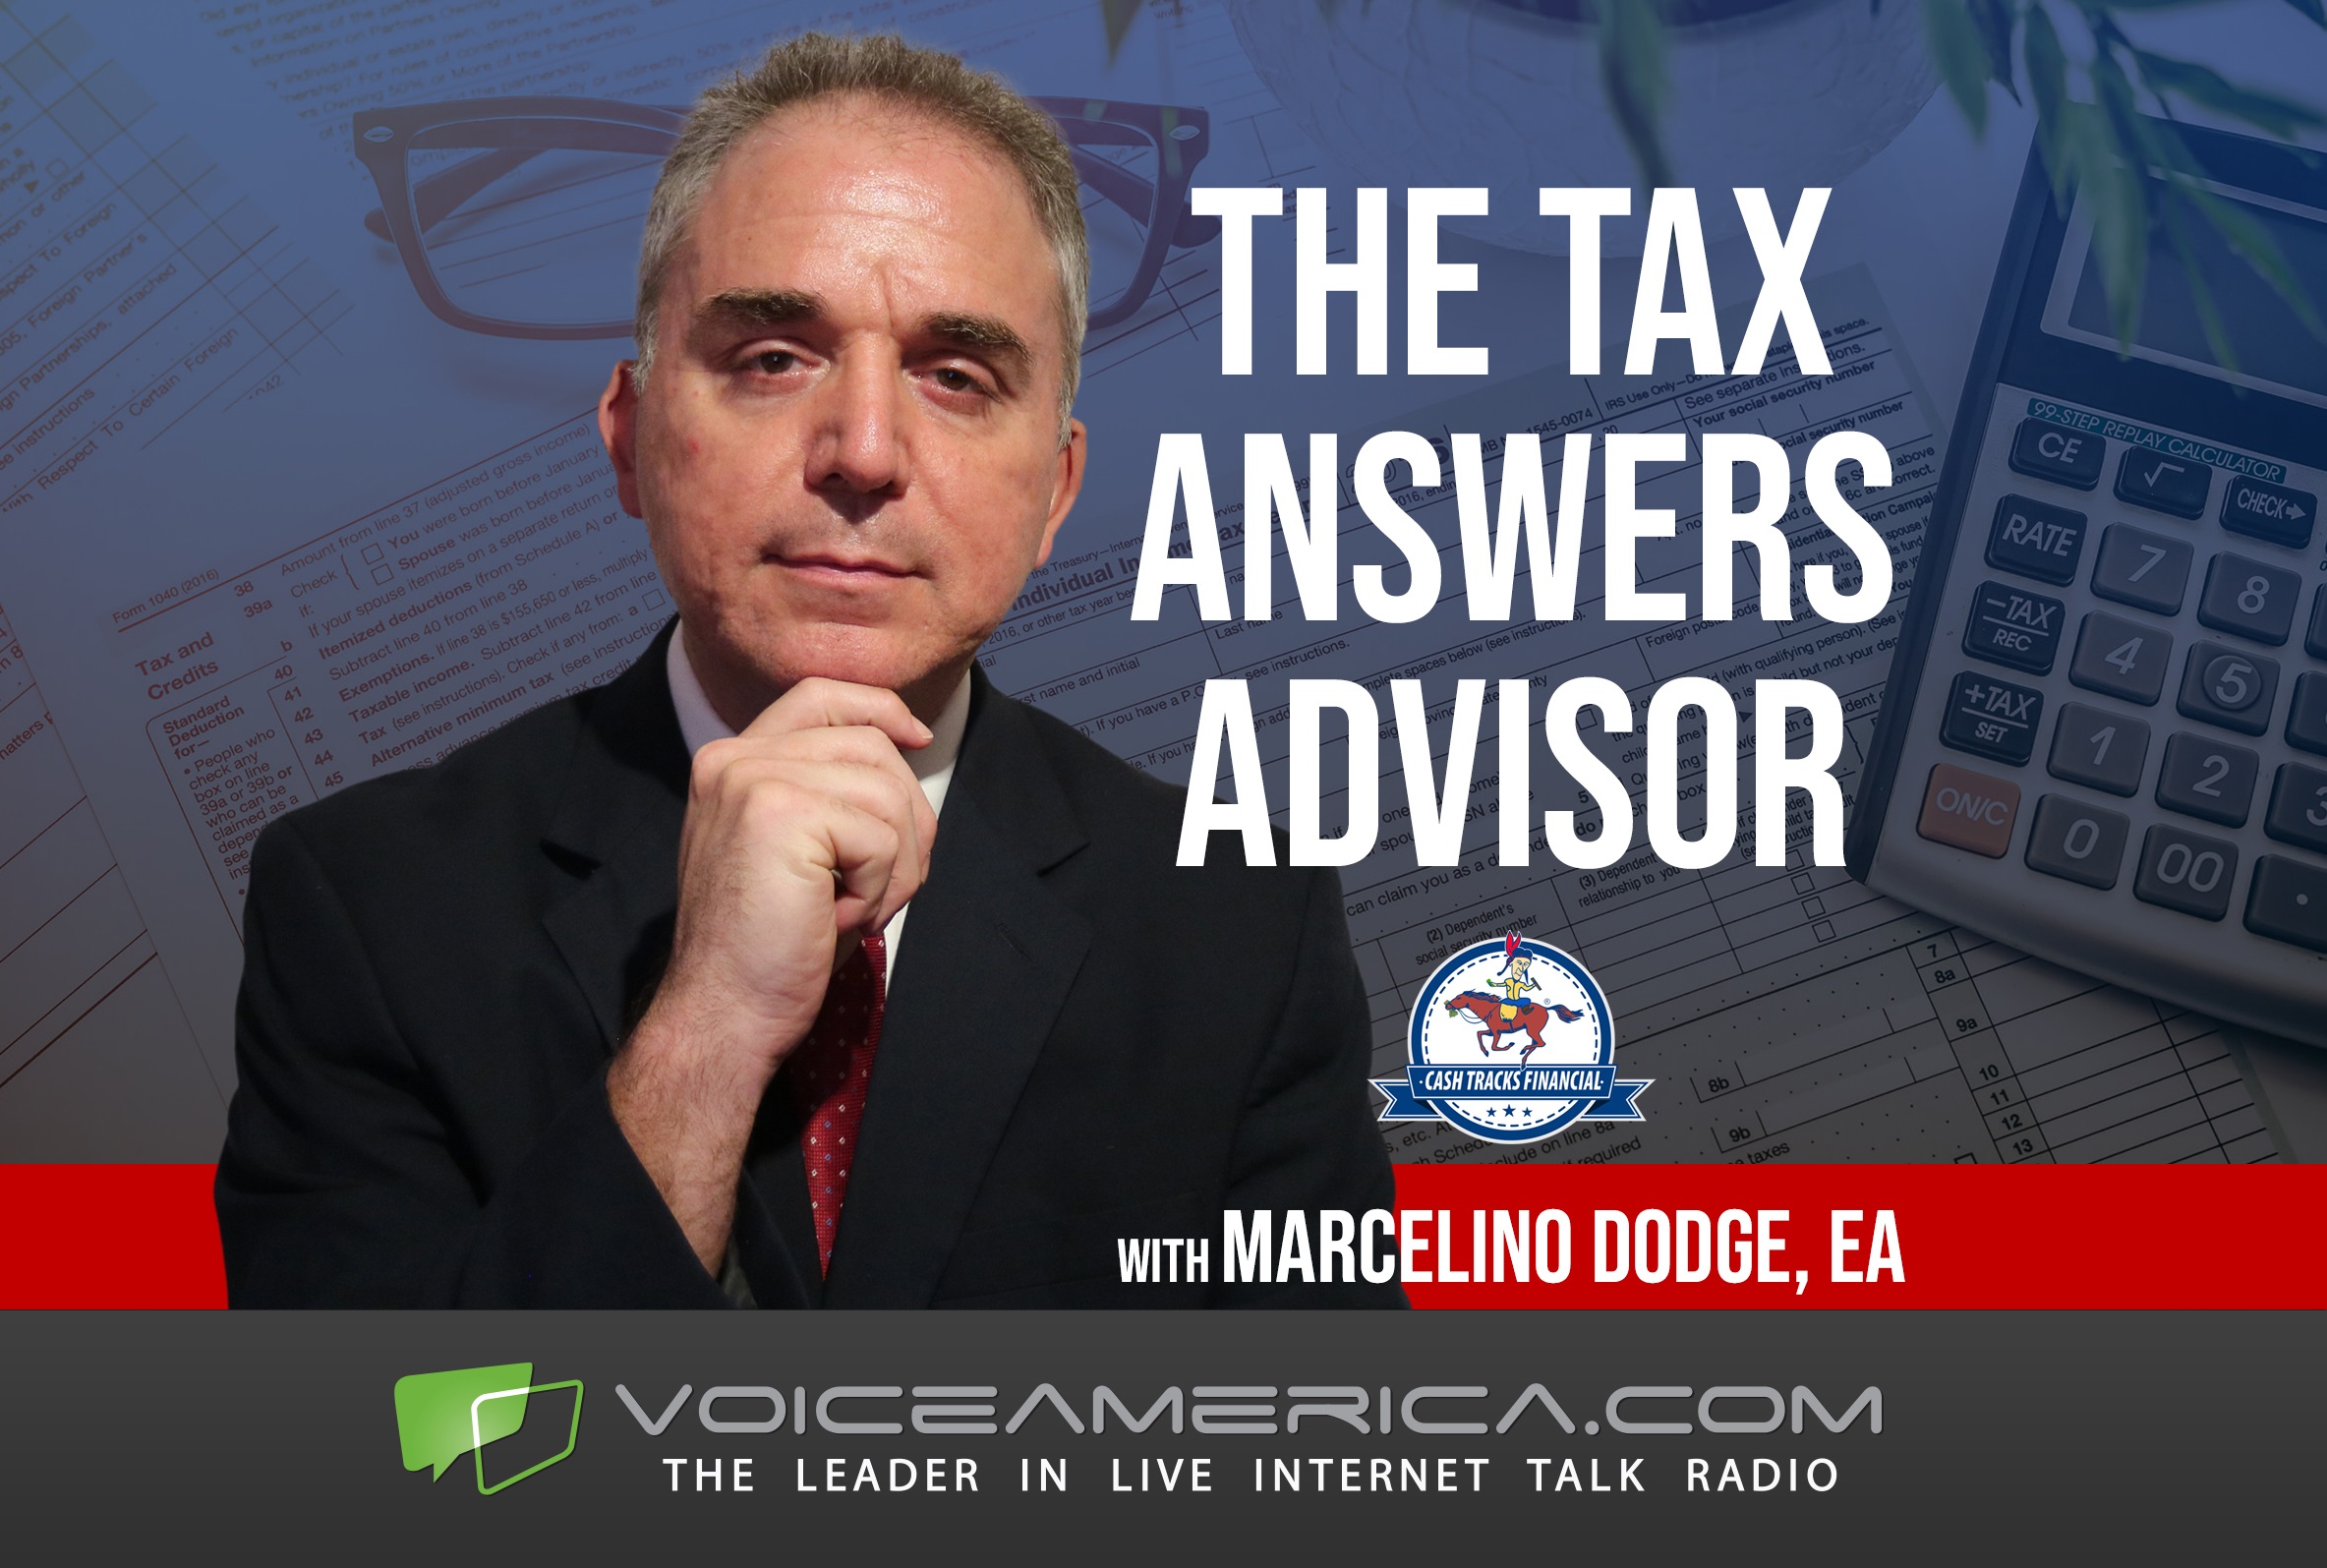 I Need What For My Taxes? A Tax Professional? Choosing Wisely!